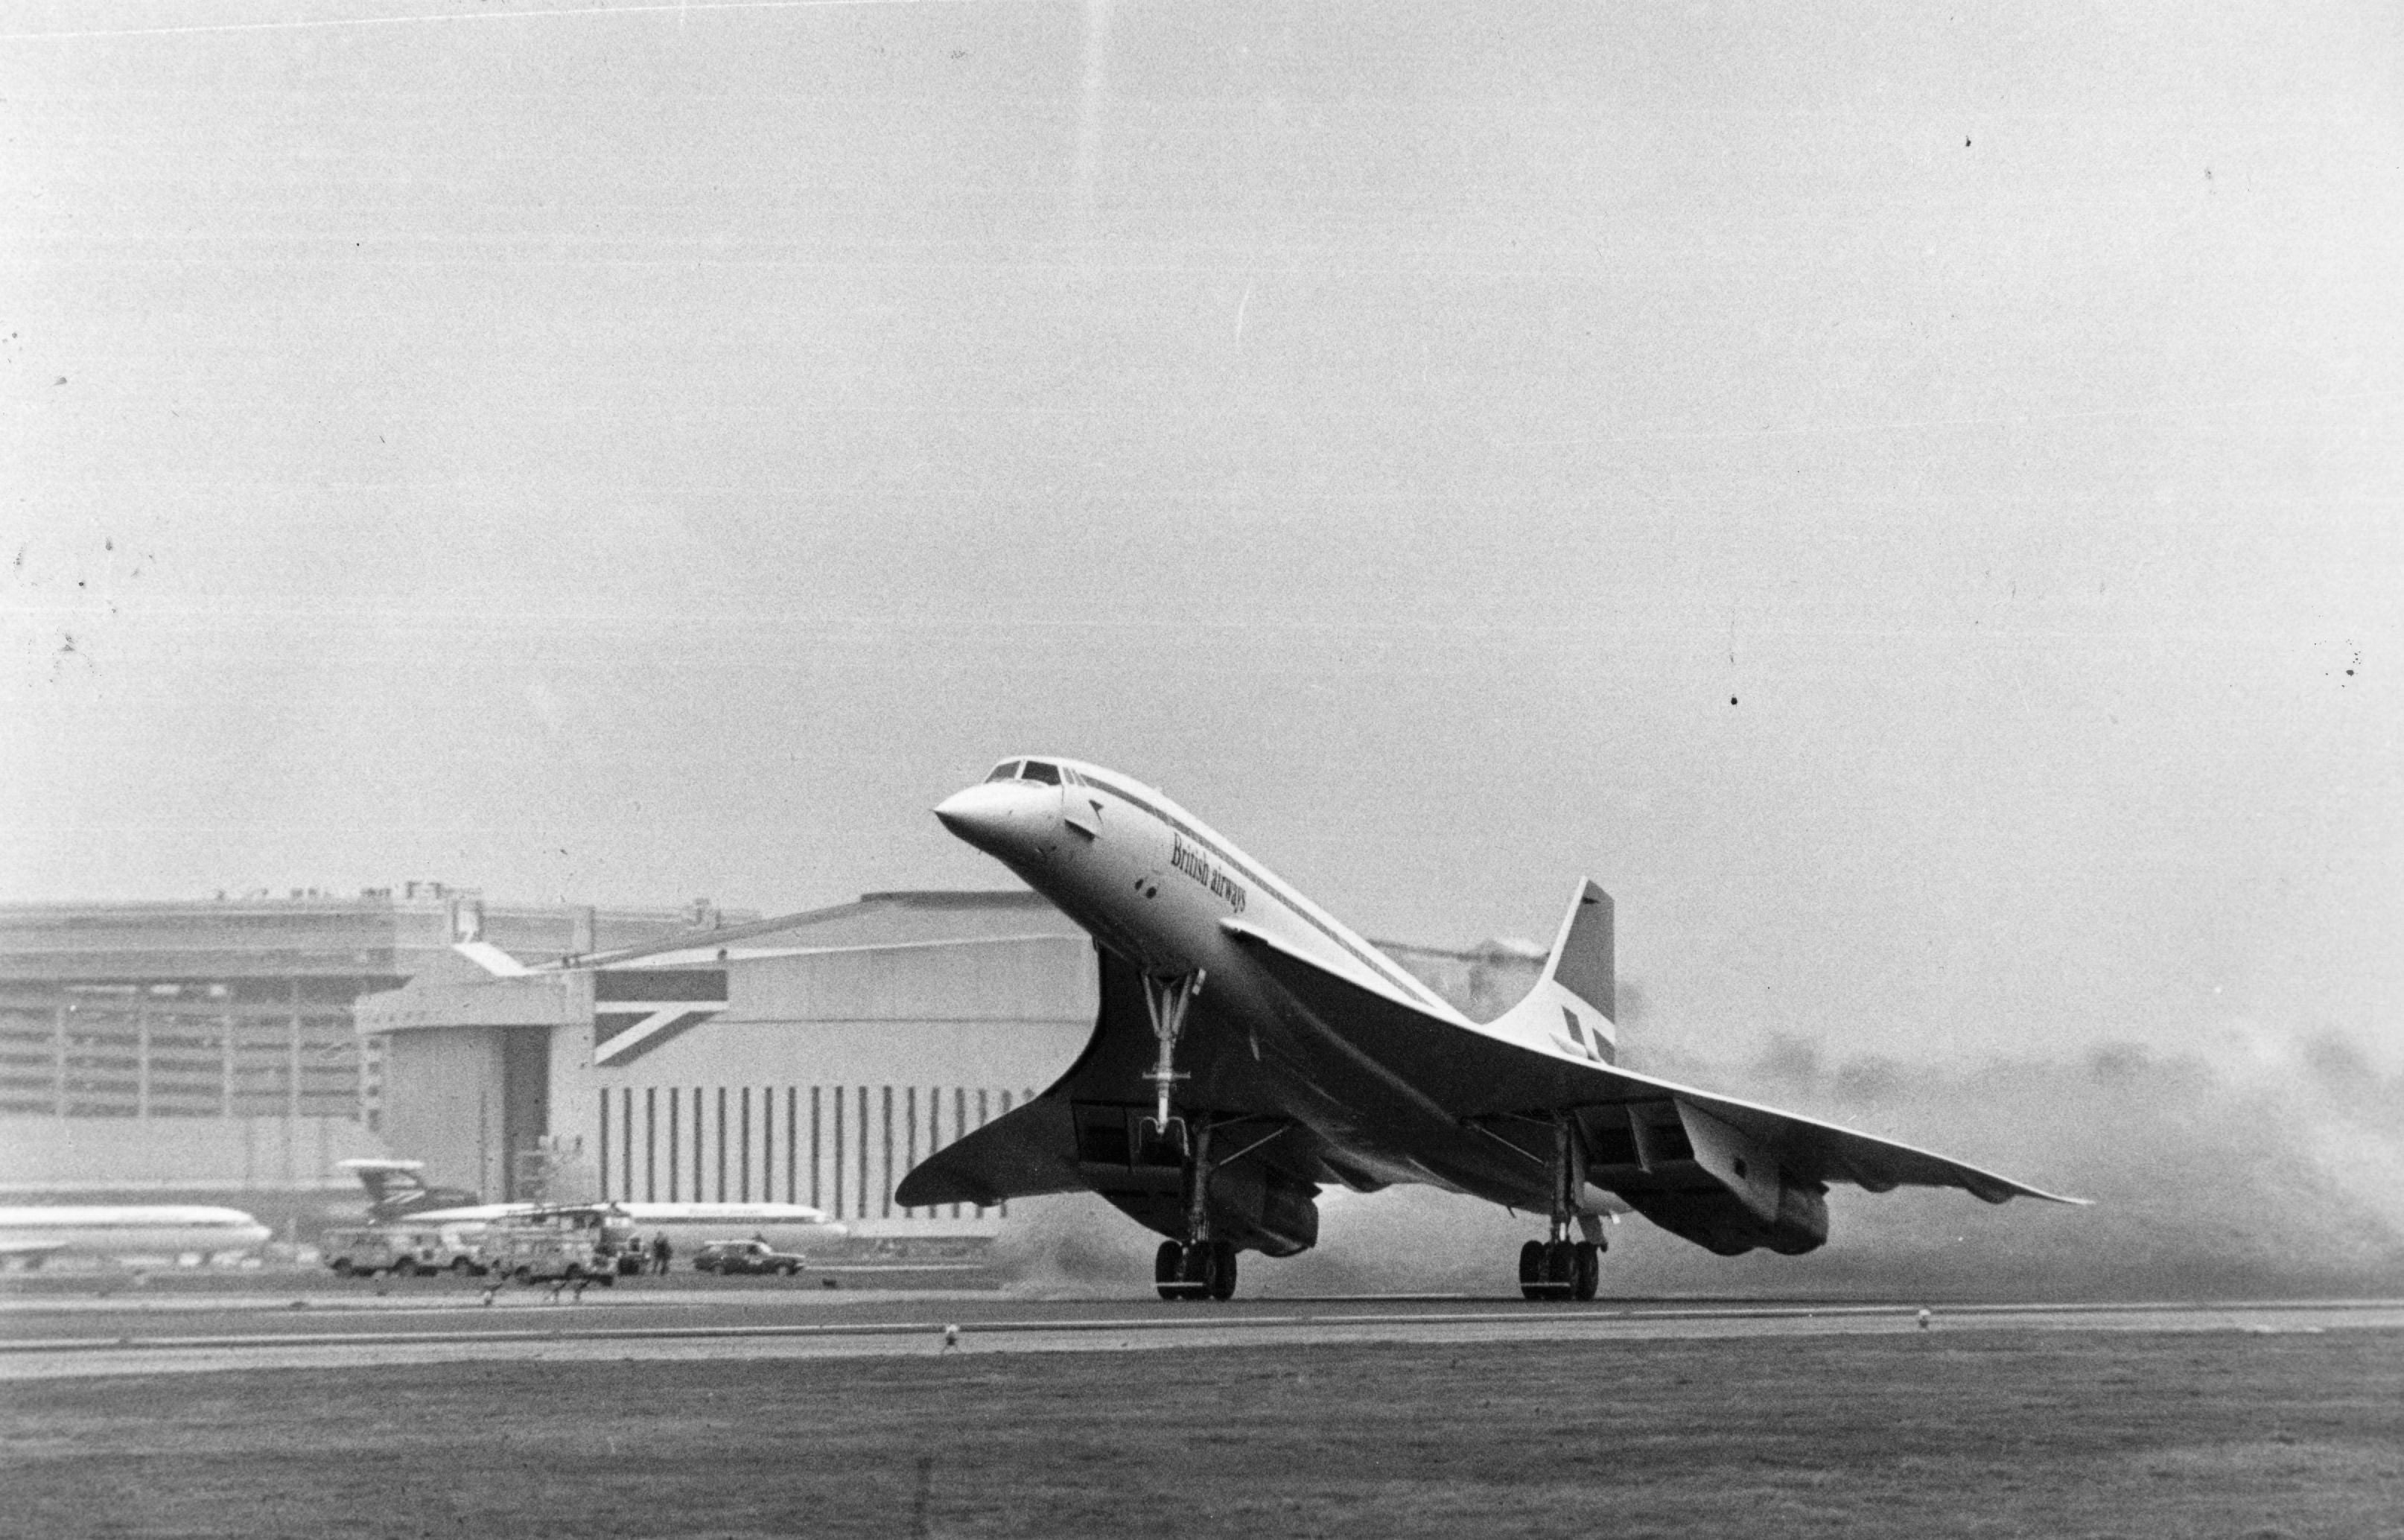 Maiden flight: British Airways Concorde departs on its first commercial journey from London Heathrow to Bahrain on 21 January 1976